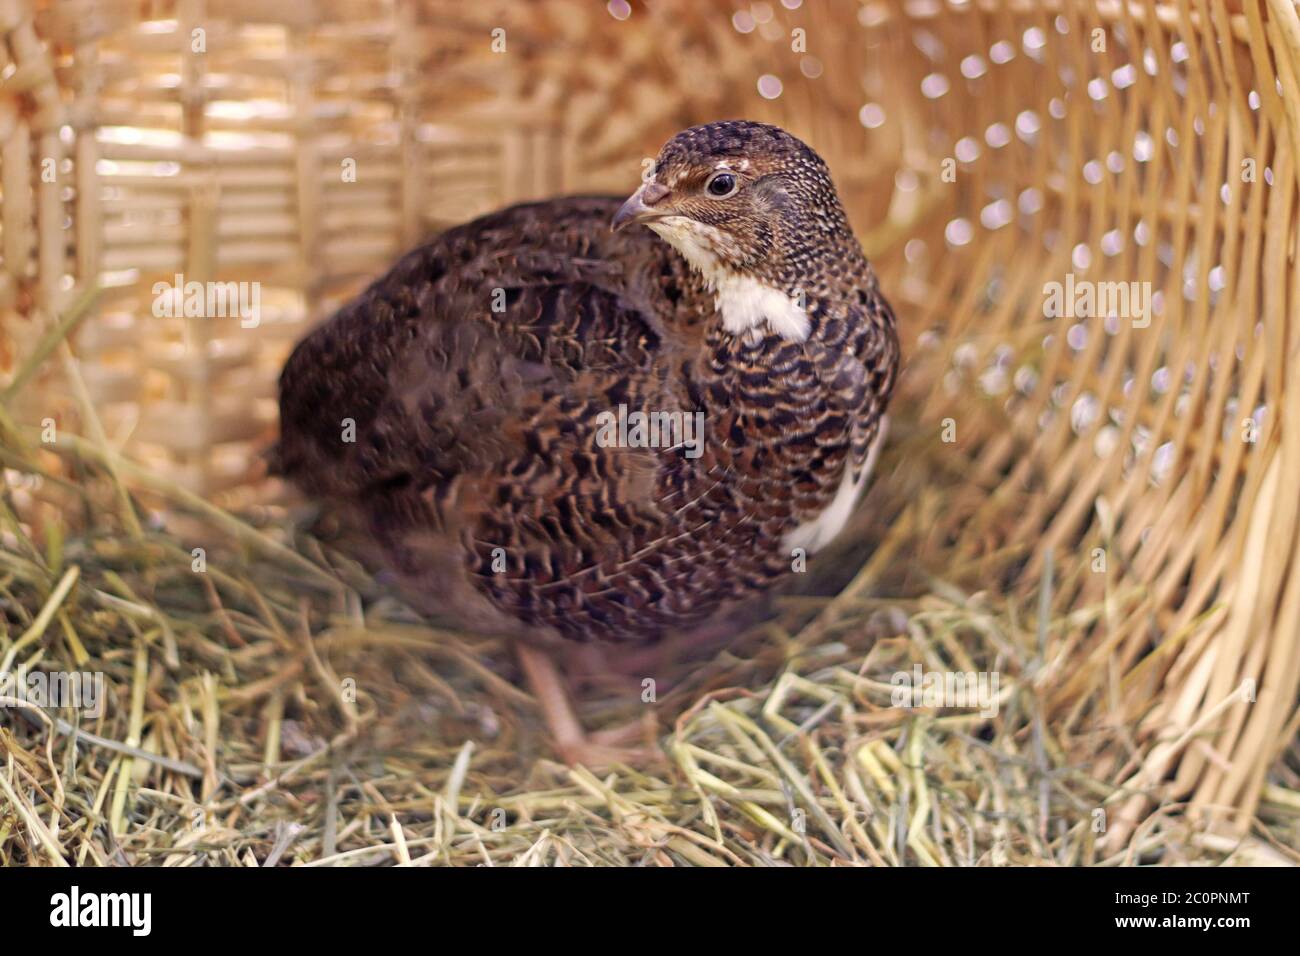 beautiful brown and white japanese quail standing on hay in a wicker basket  Stock Photo - Alamy